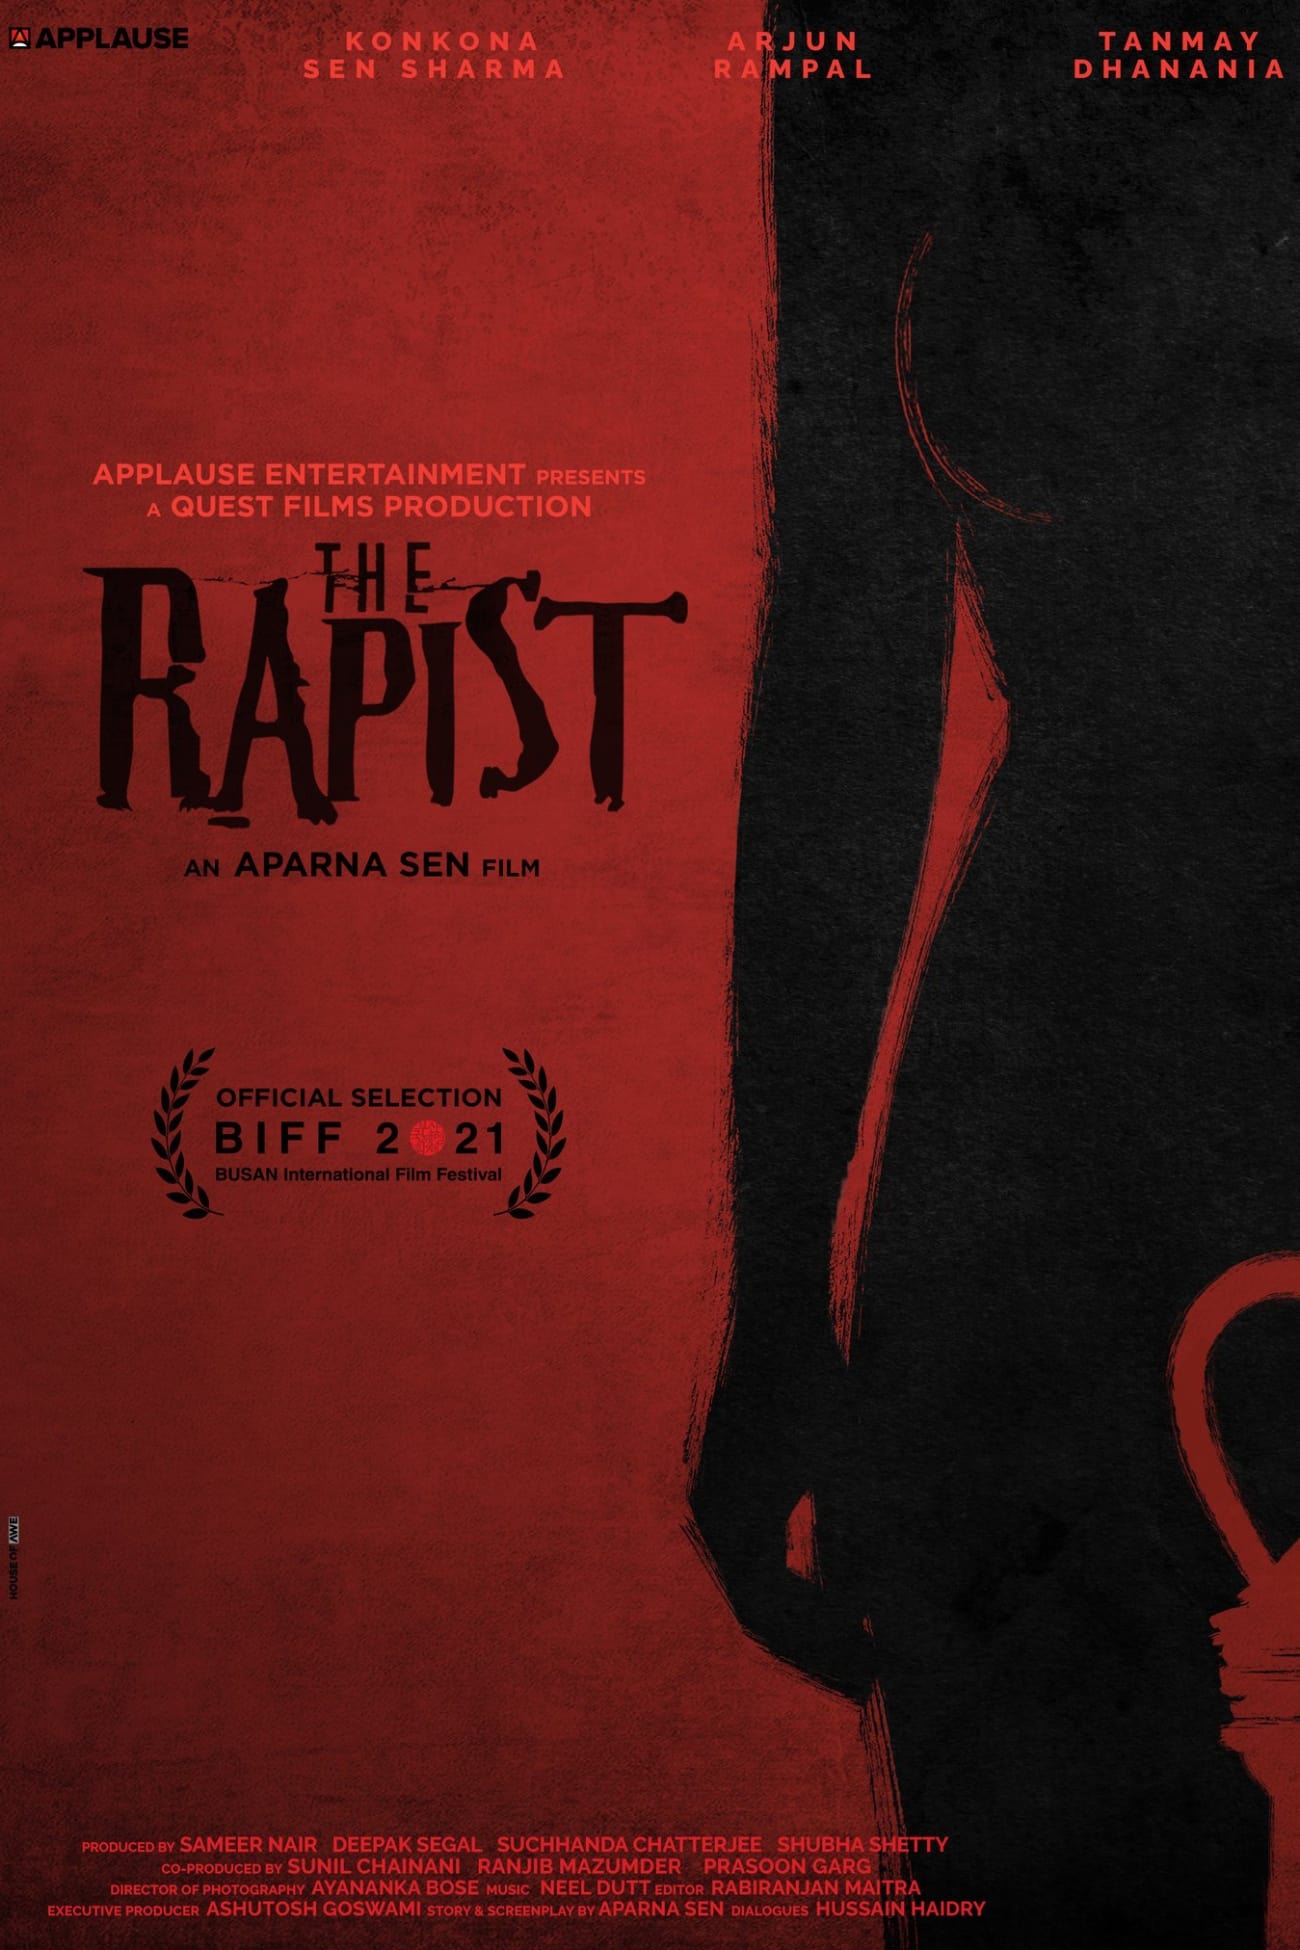 Poster for the movie "The Rapist"